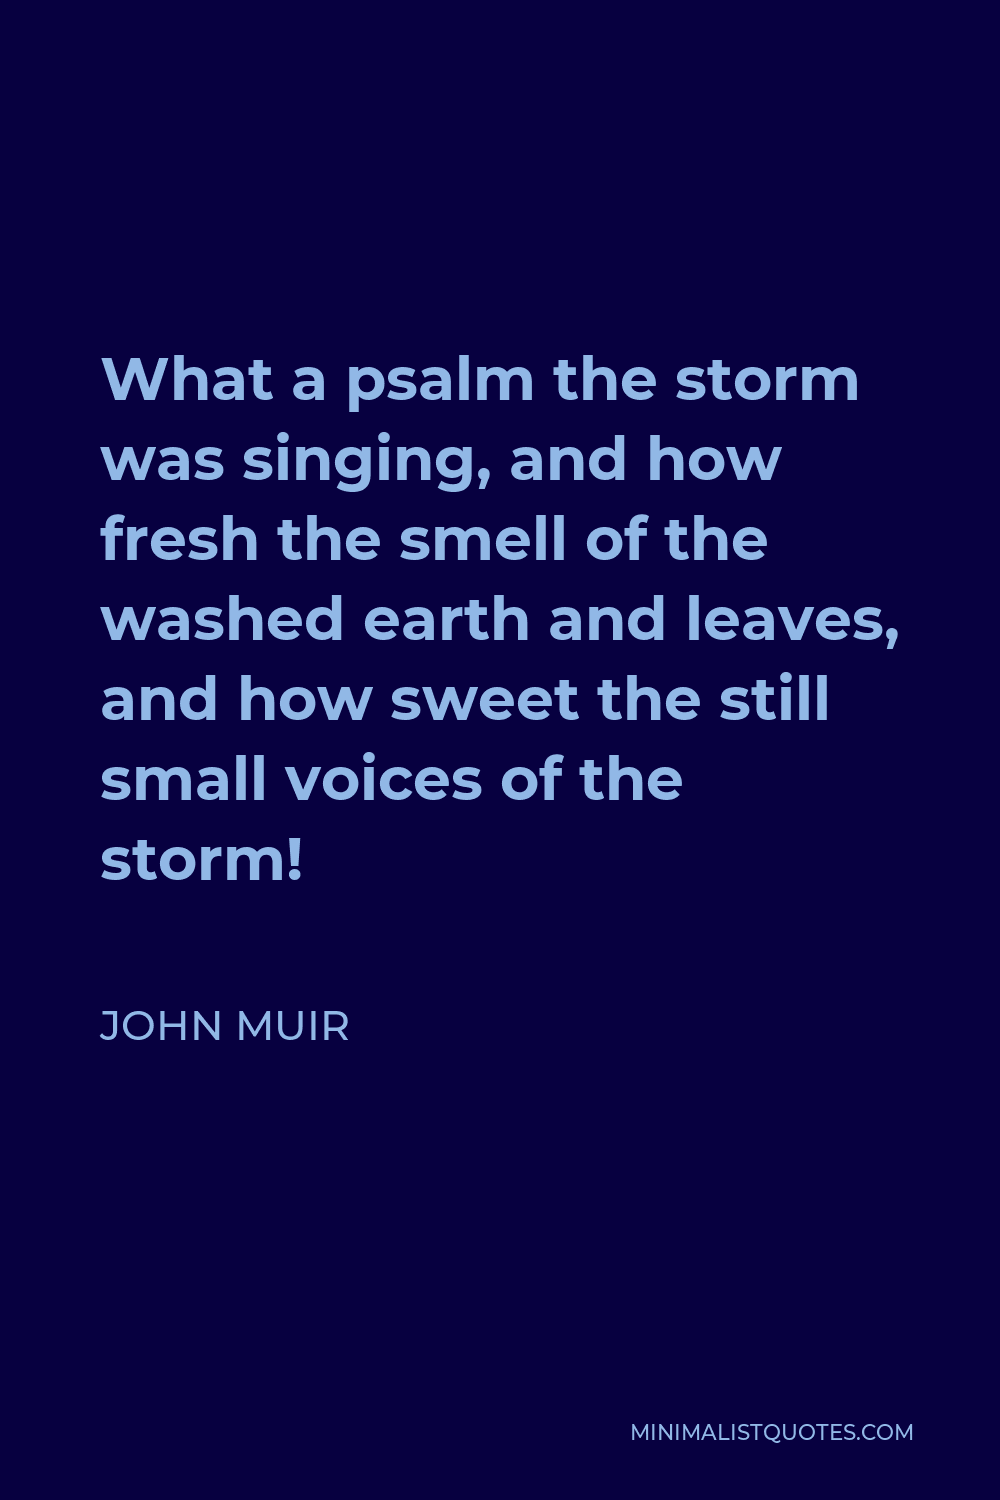 John Muir Quote - What a psalm the storm was singing, and how fresh the smell of the washed earth and leaves, and how sweet the still small voices of the storm!